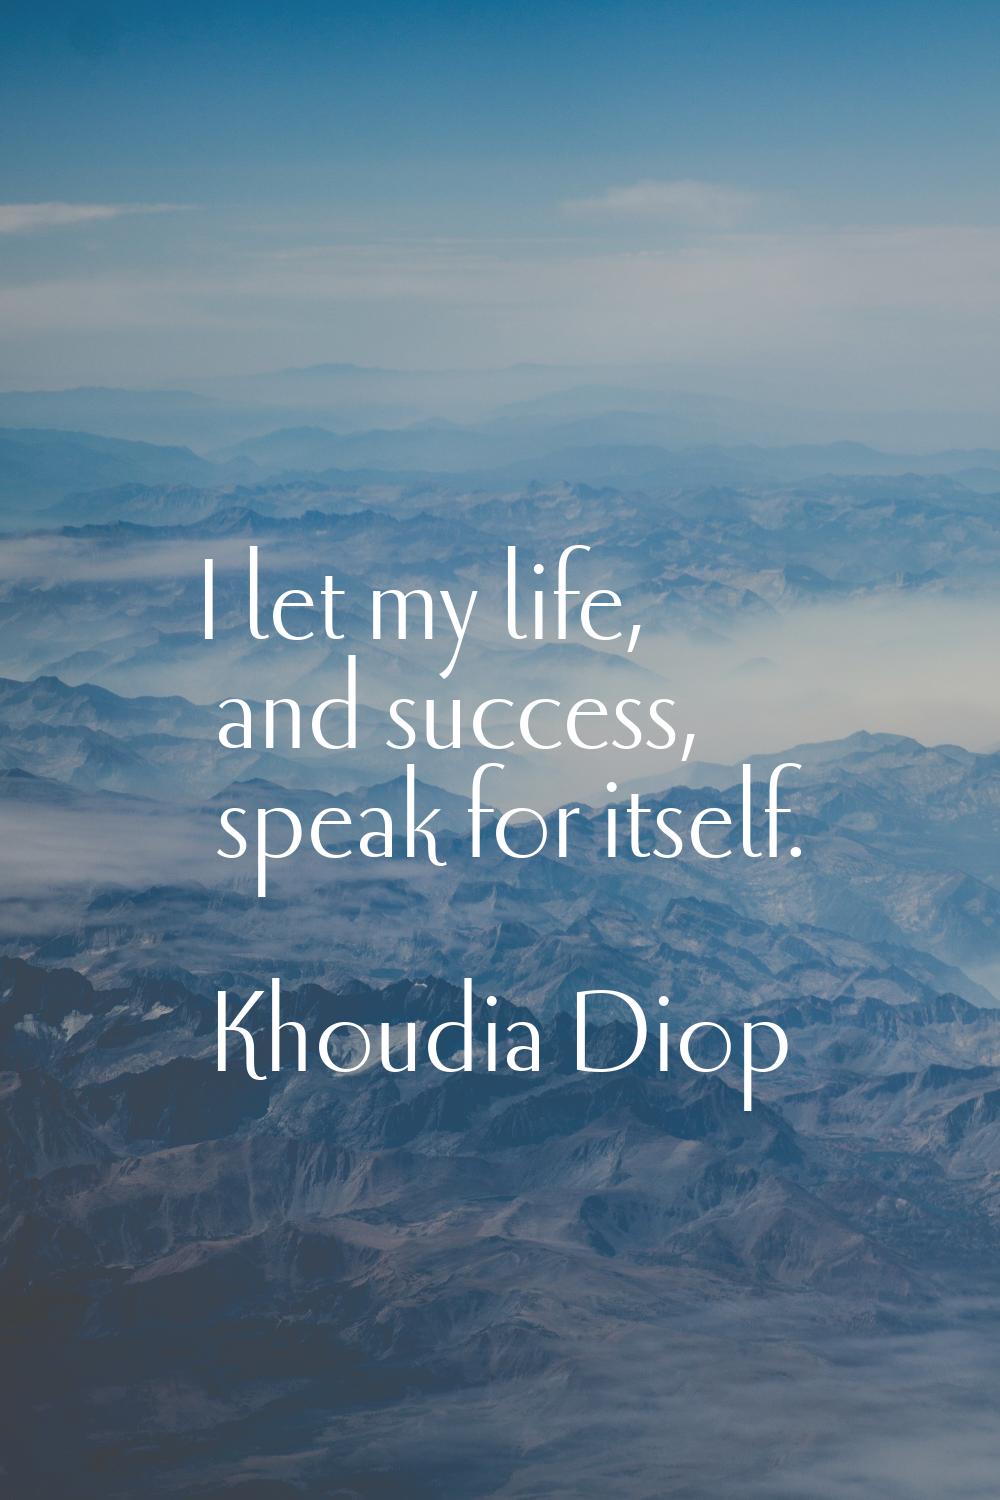 I let my life, and success, speak for itself.